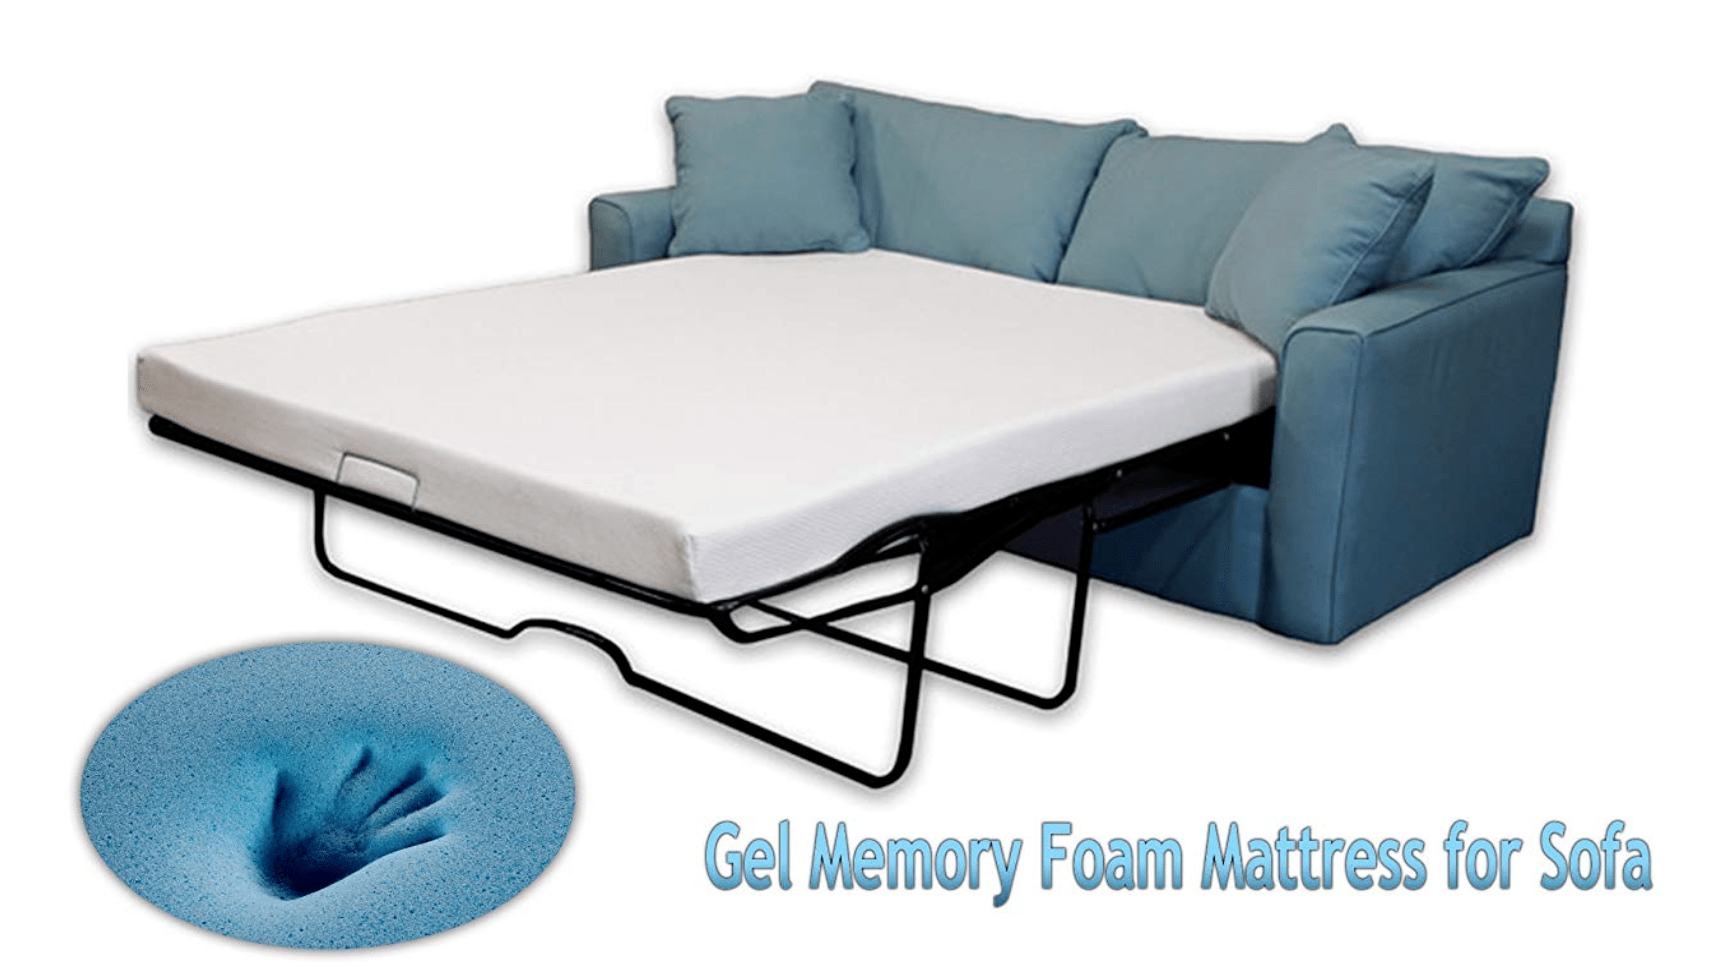 additional mattress for sofa bed